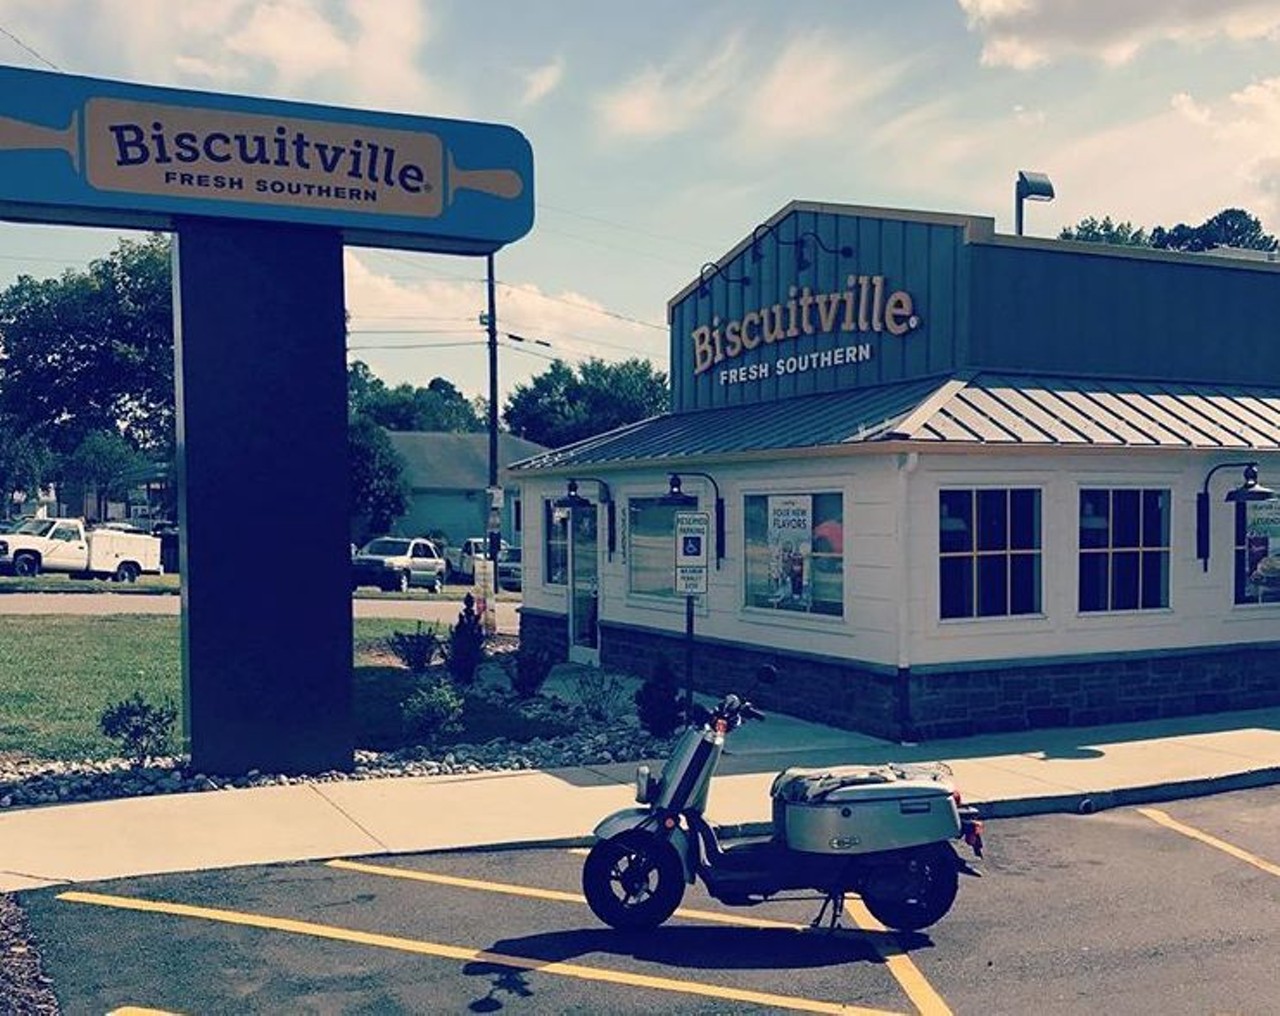 Biscuitville
Biscuits, oh yes. But at Biscuitville you can also find tasty lunch sandwiches, breakfast food, and fresh North Carolina pickles. Unfortunately, you can&#146;t find Biscuitville anywhere outside North Carolina. No moves to Florida have been announced, but who knows? 
Photo via agentpheeb/Instagram